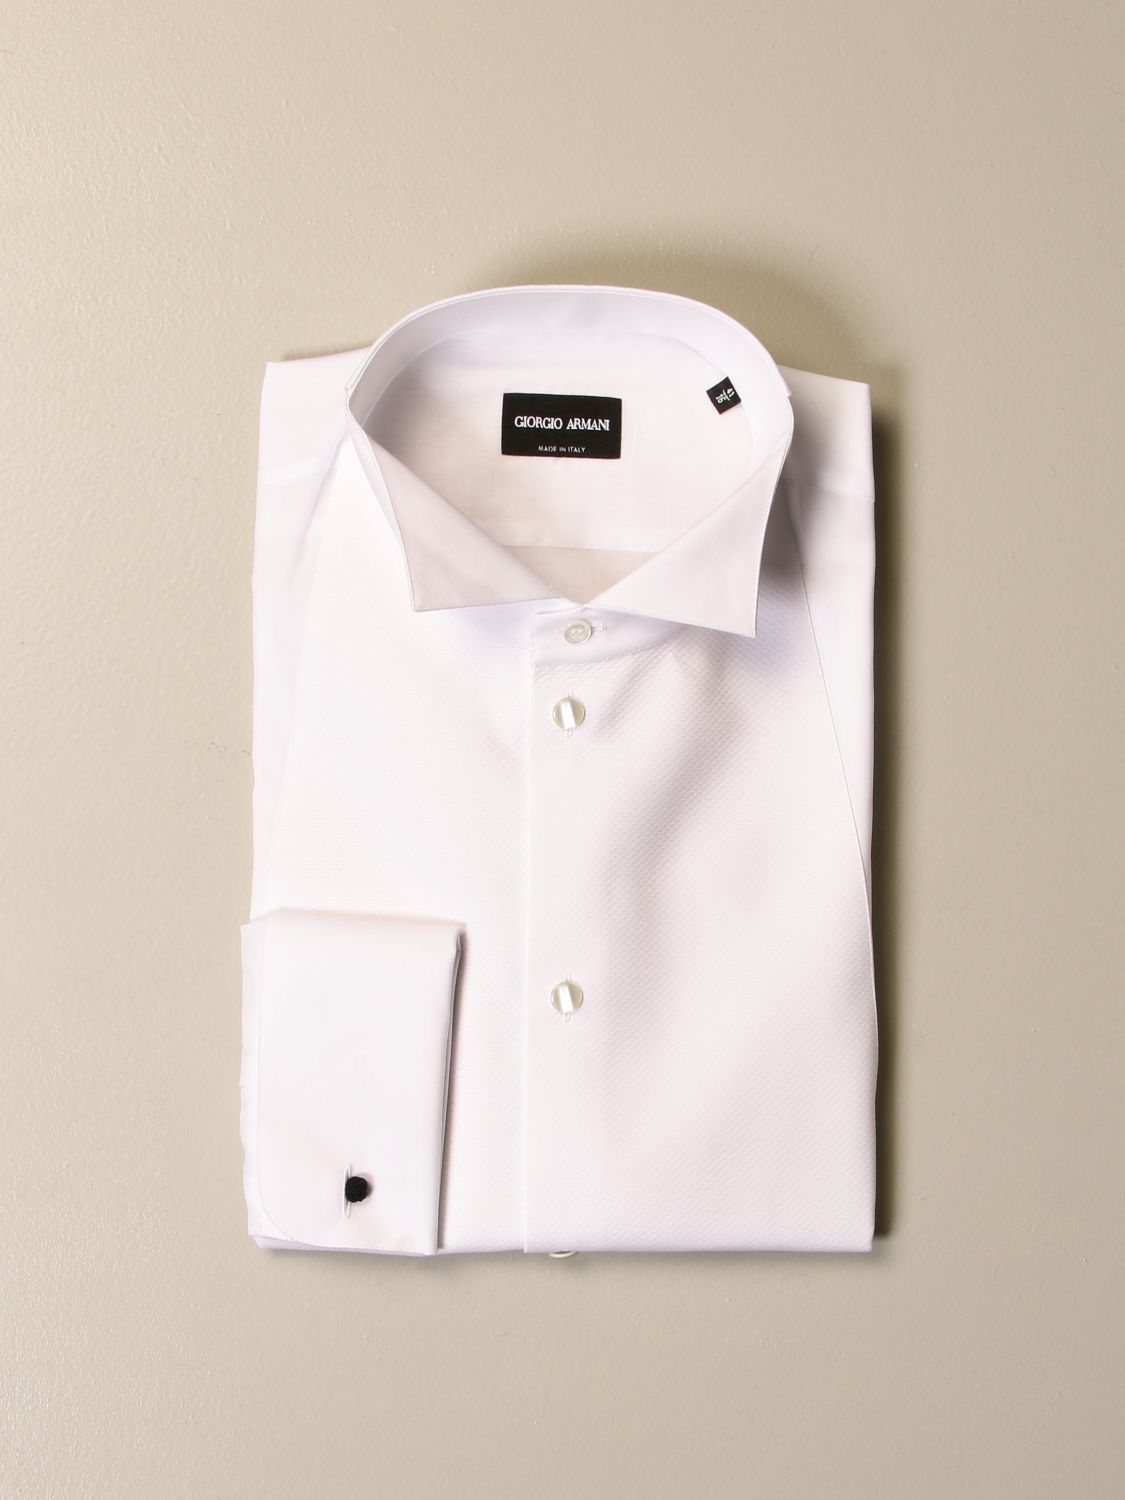 Giorgio Armani Outlet: shirt in cotton with diplomatic collar - White